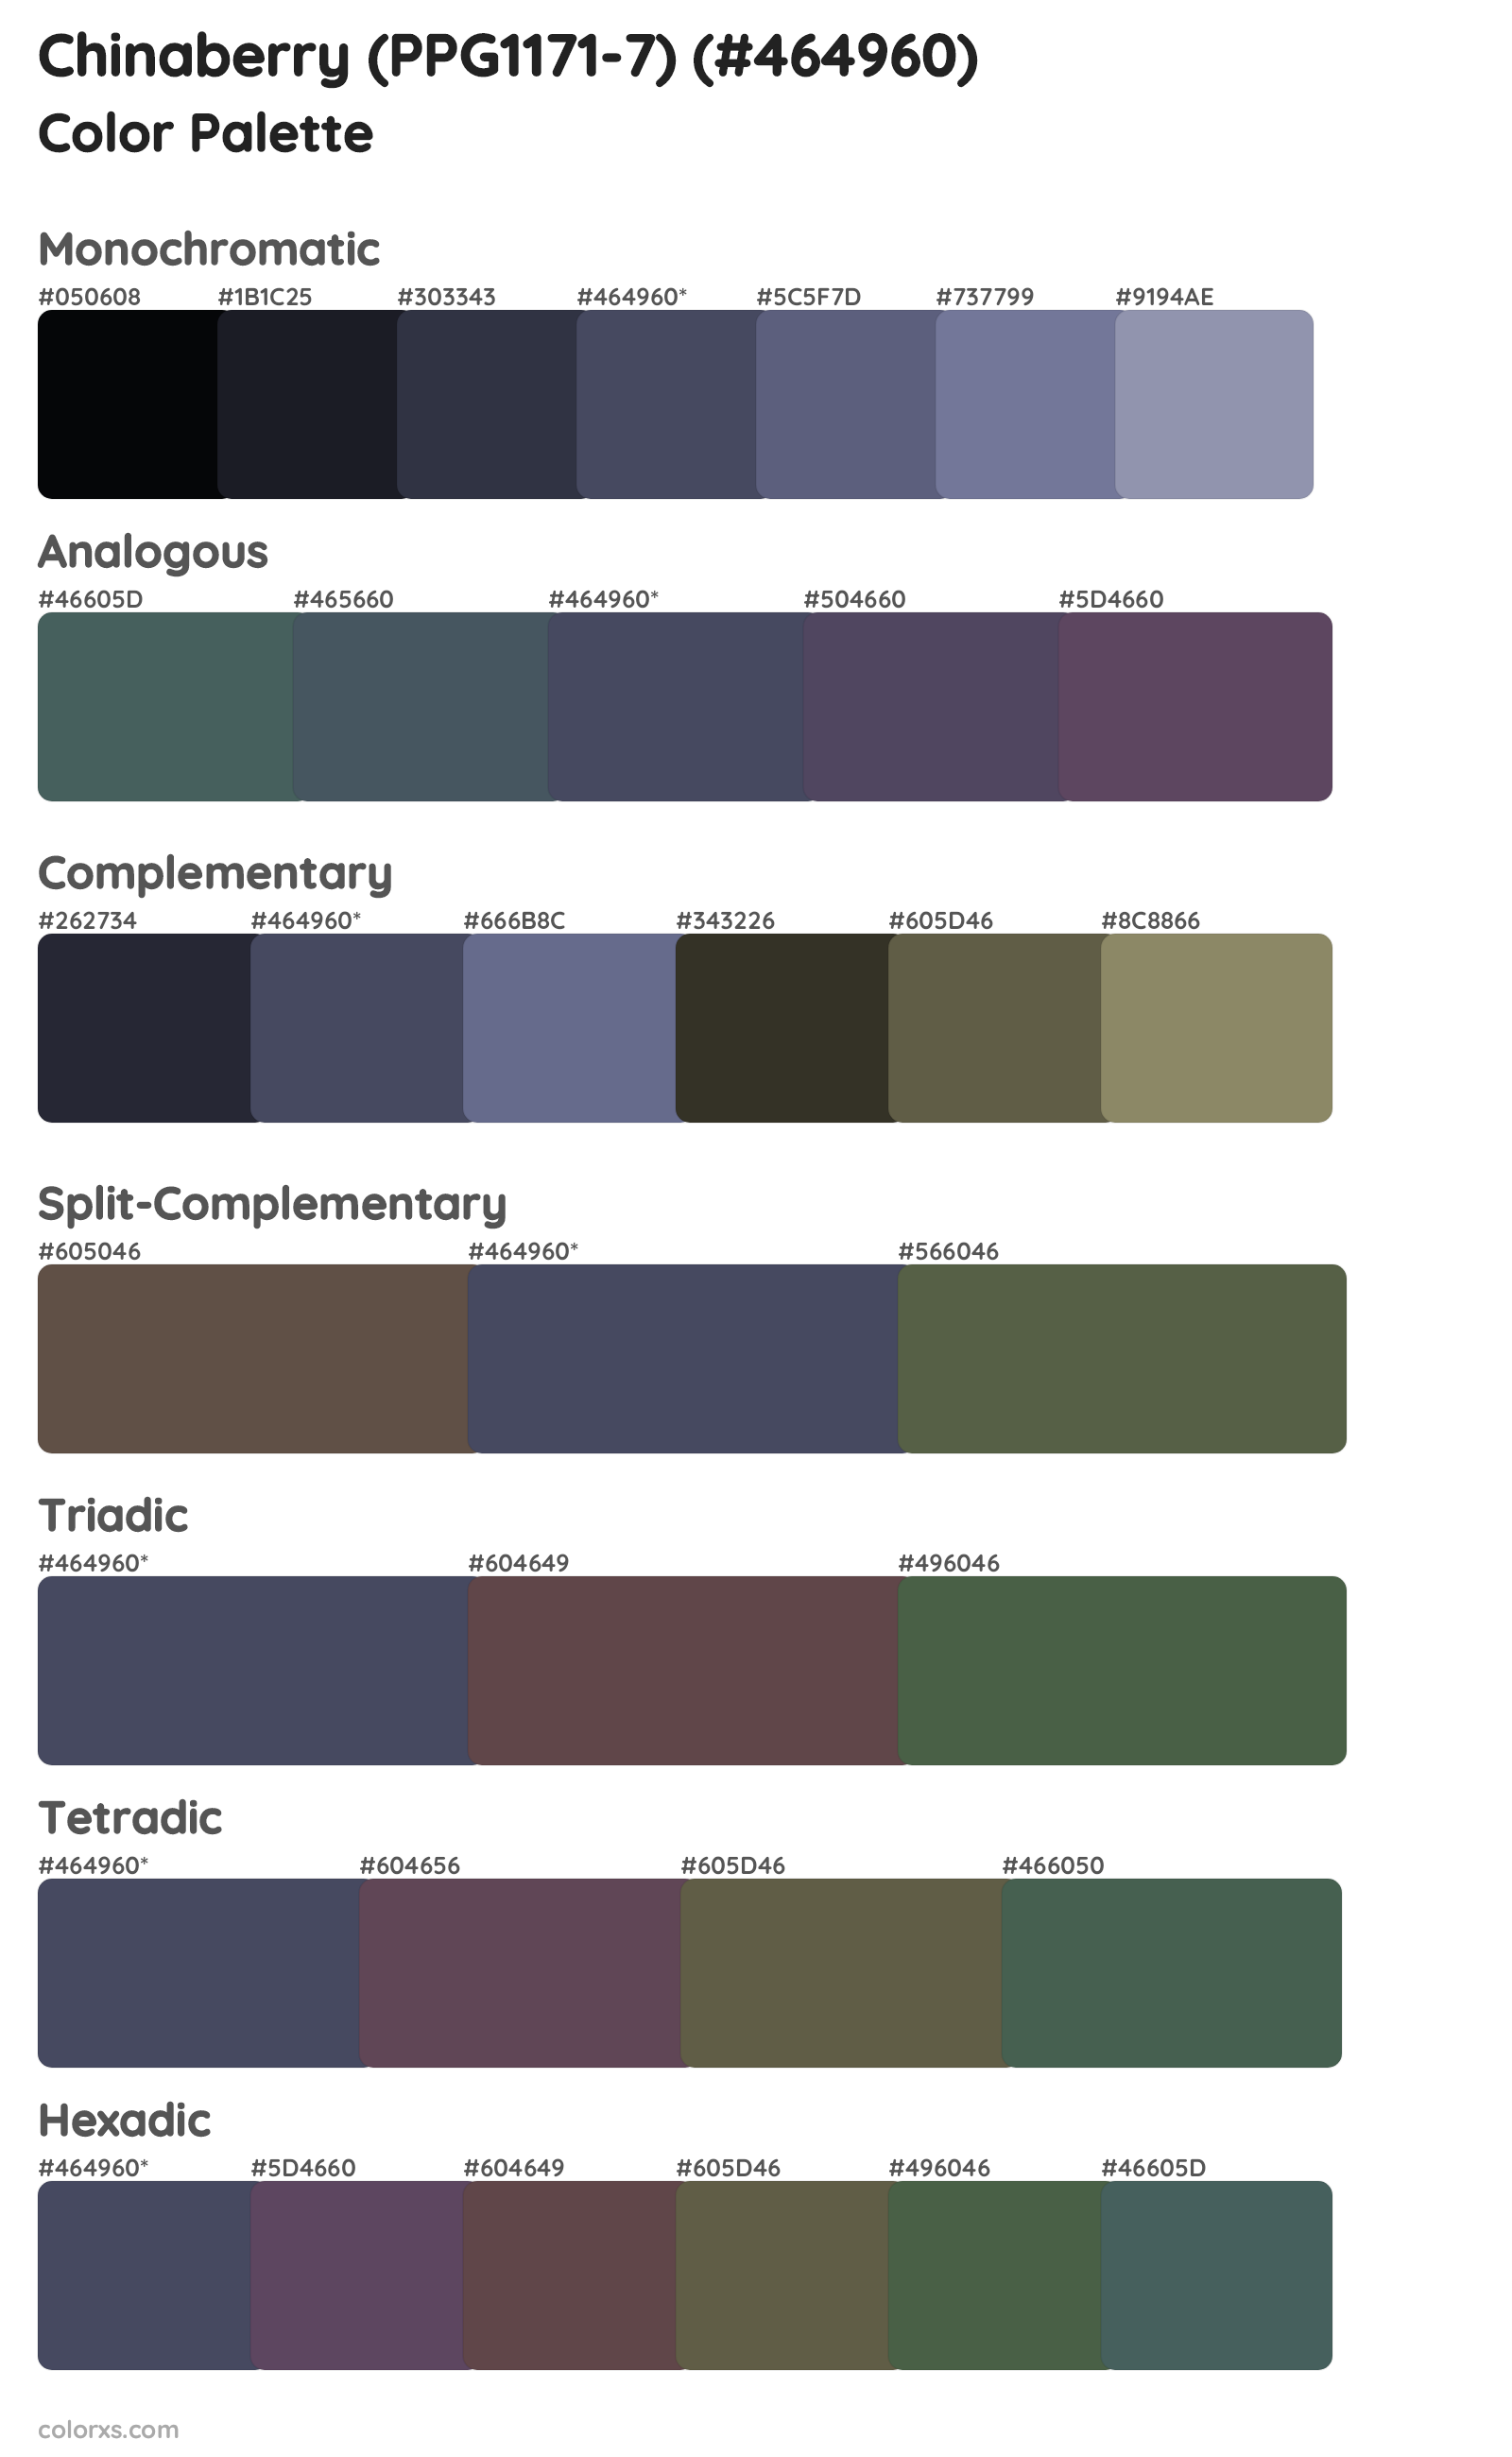 Chinaberry (PPG1171-7) Color Scheme Palettes